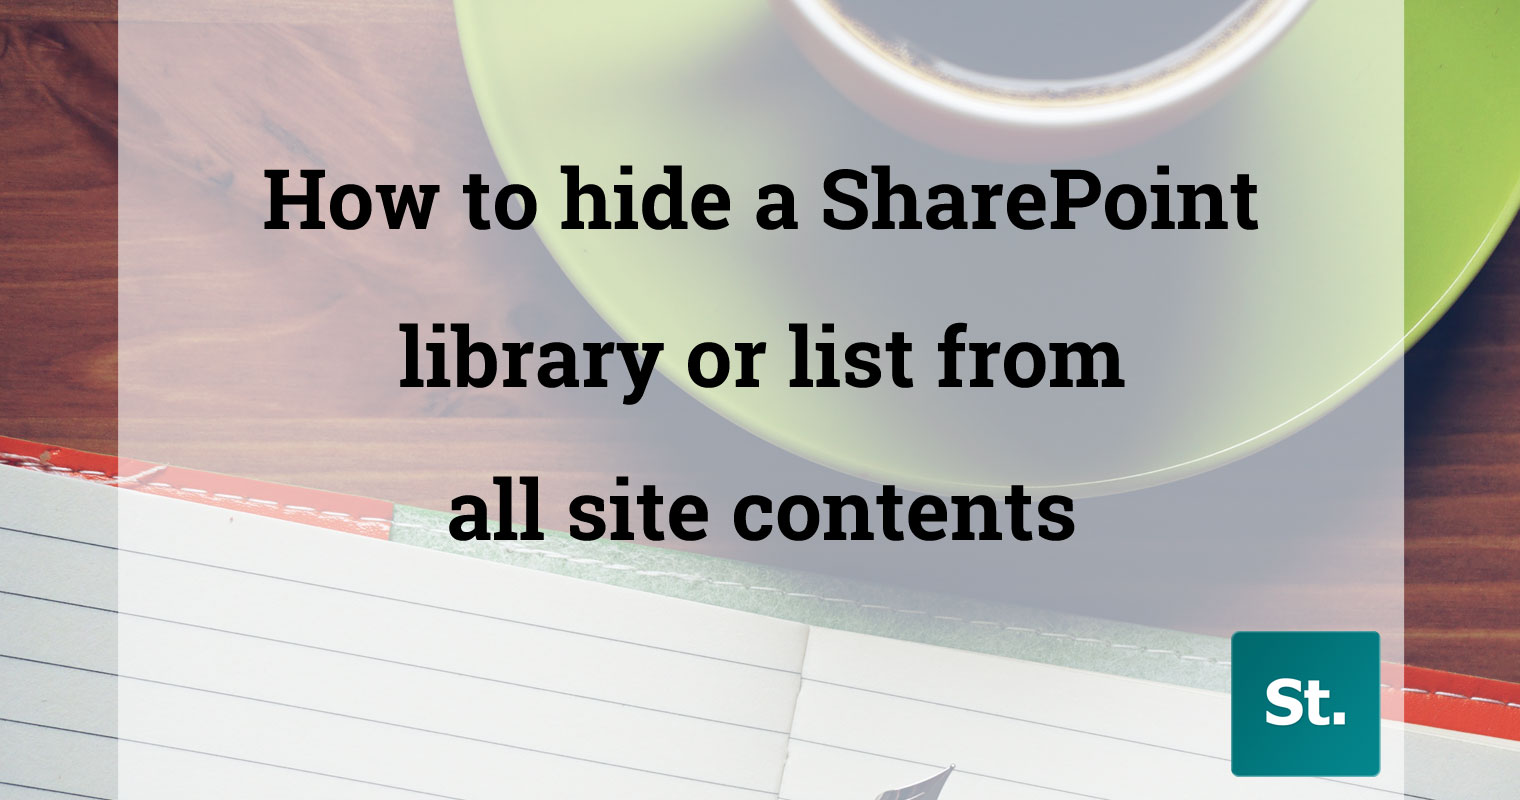 Hide a SharePoint list or library from view all site contents